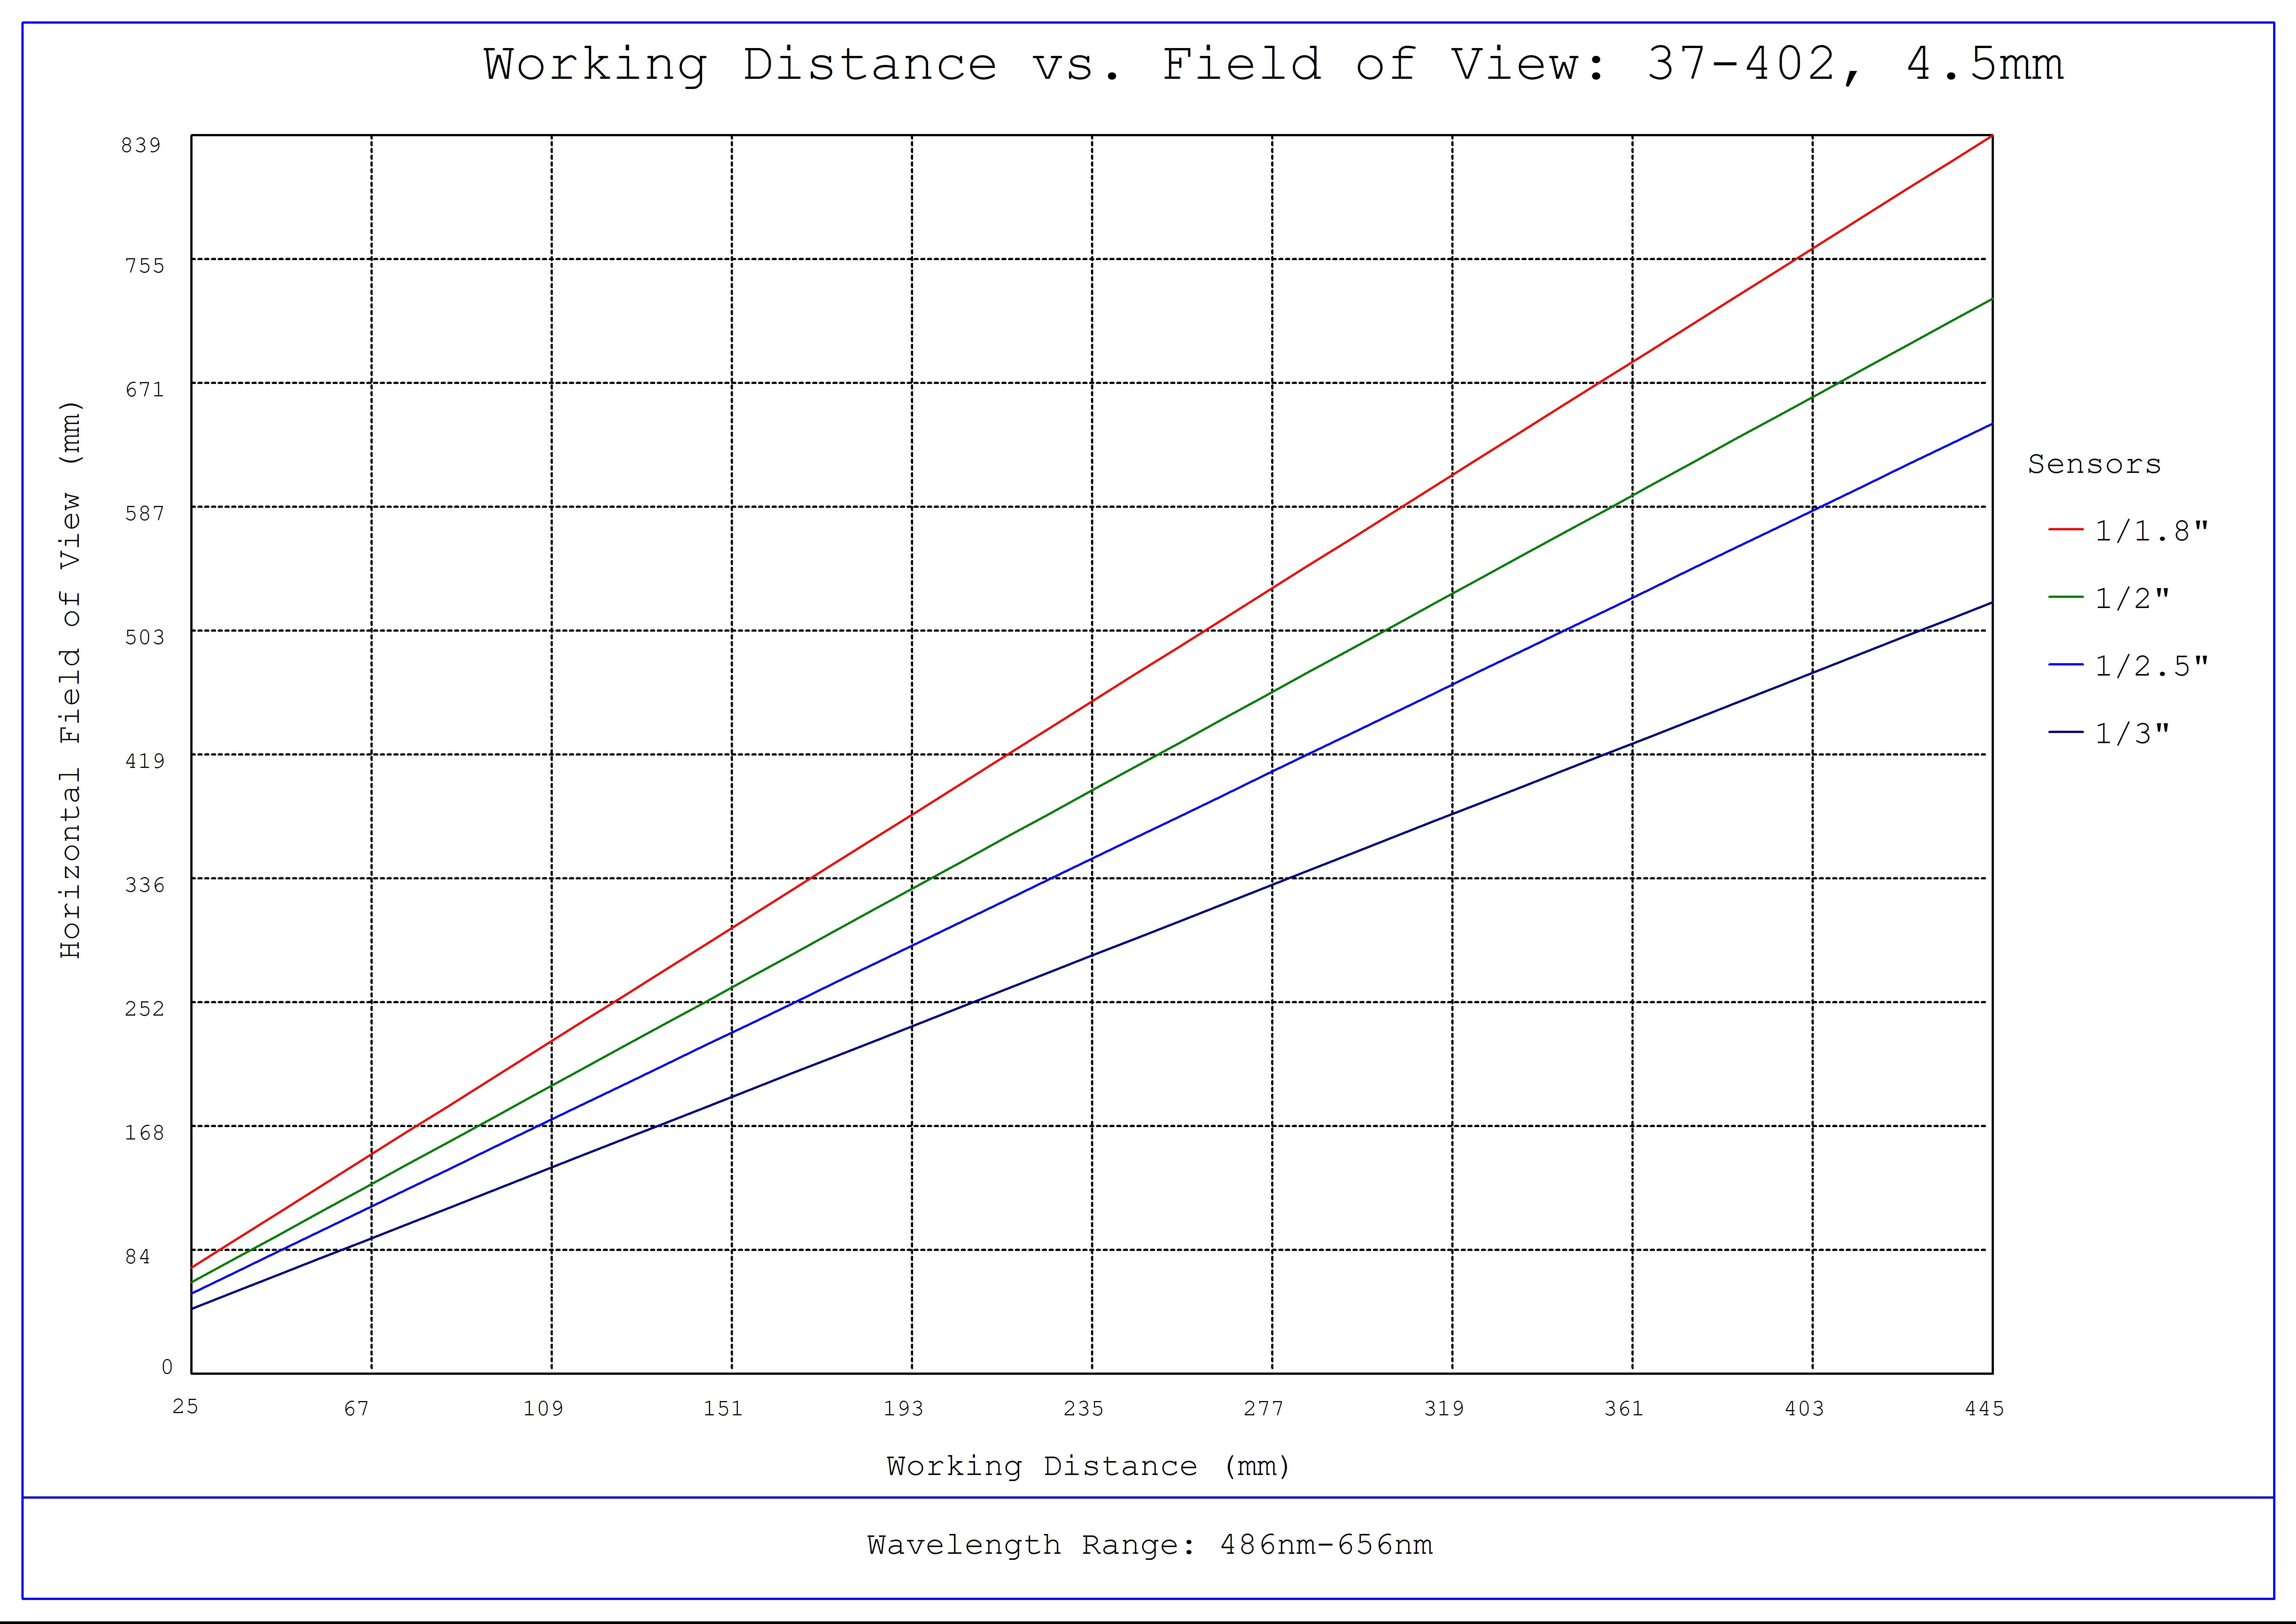 #37-402, 4.5mm, f/8 Cr Series Fixed Focal Length Lens, Working Distance versus Field of View Plot